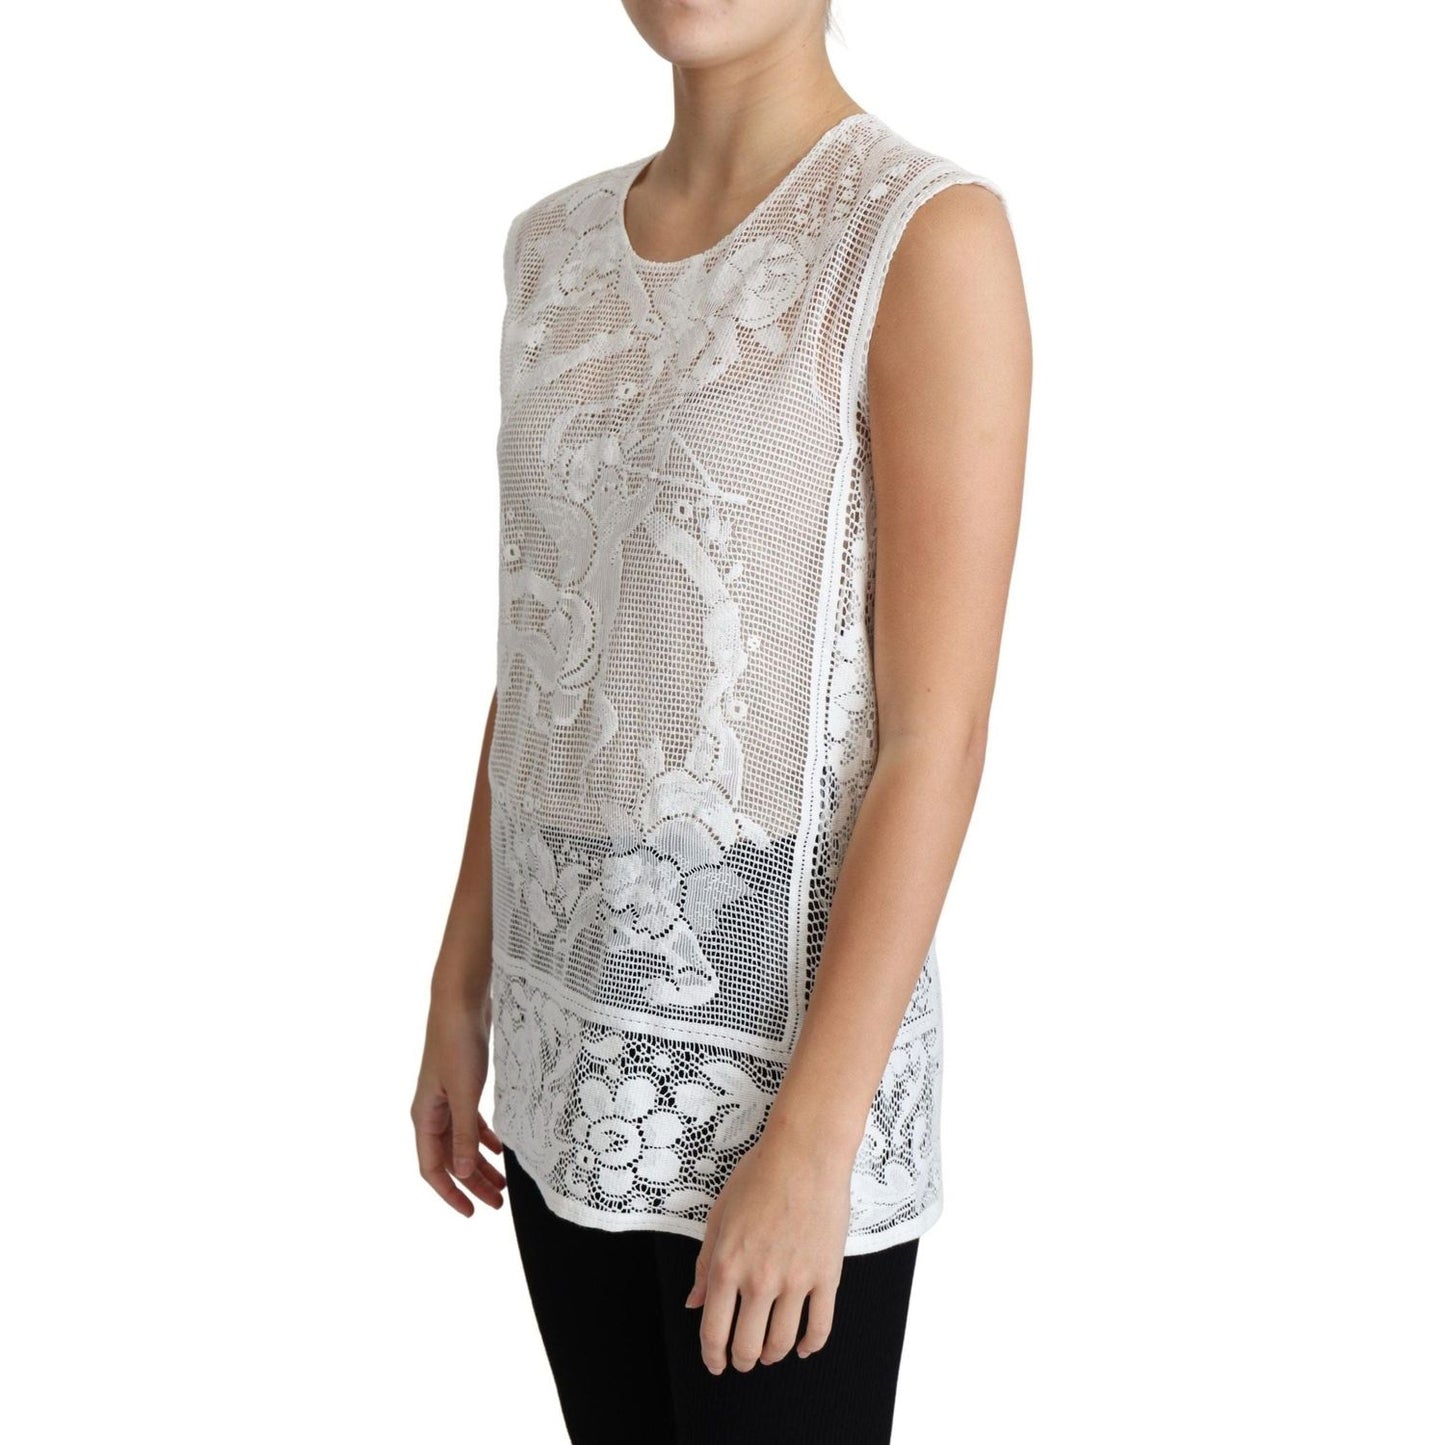 Dolce & Gabbana Chic Lace Floral Sleeveless Top white-cotton-lace-floral-angel-motif-tank-top